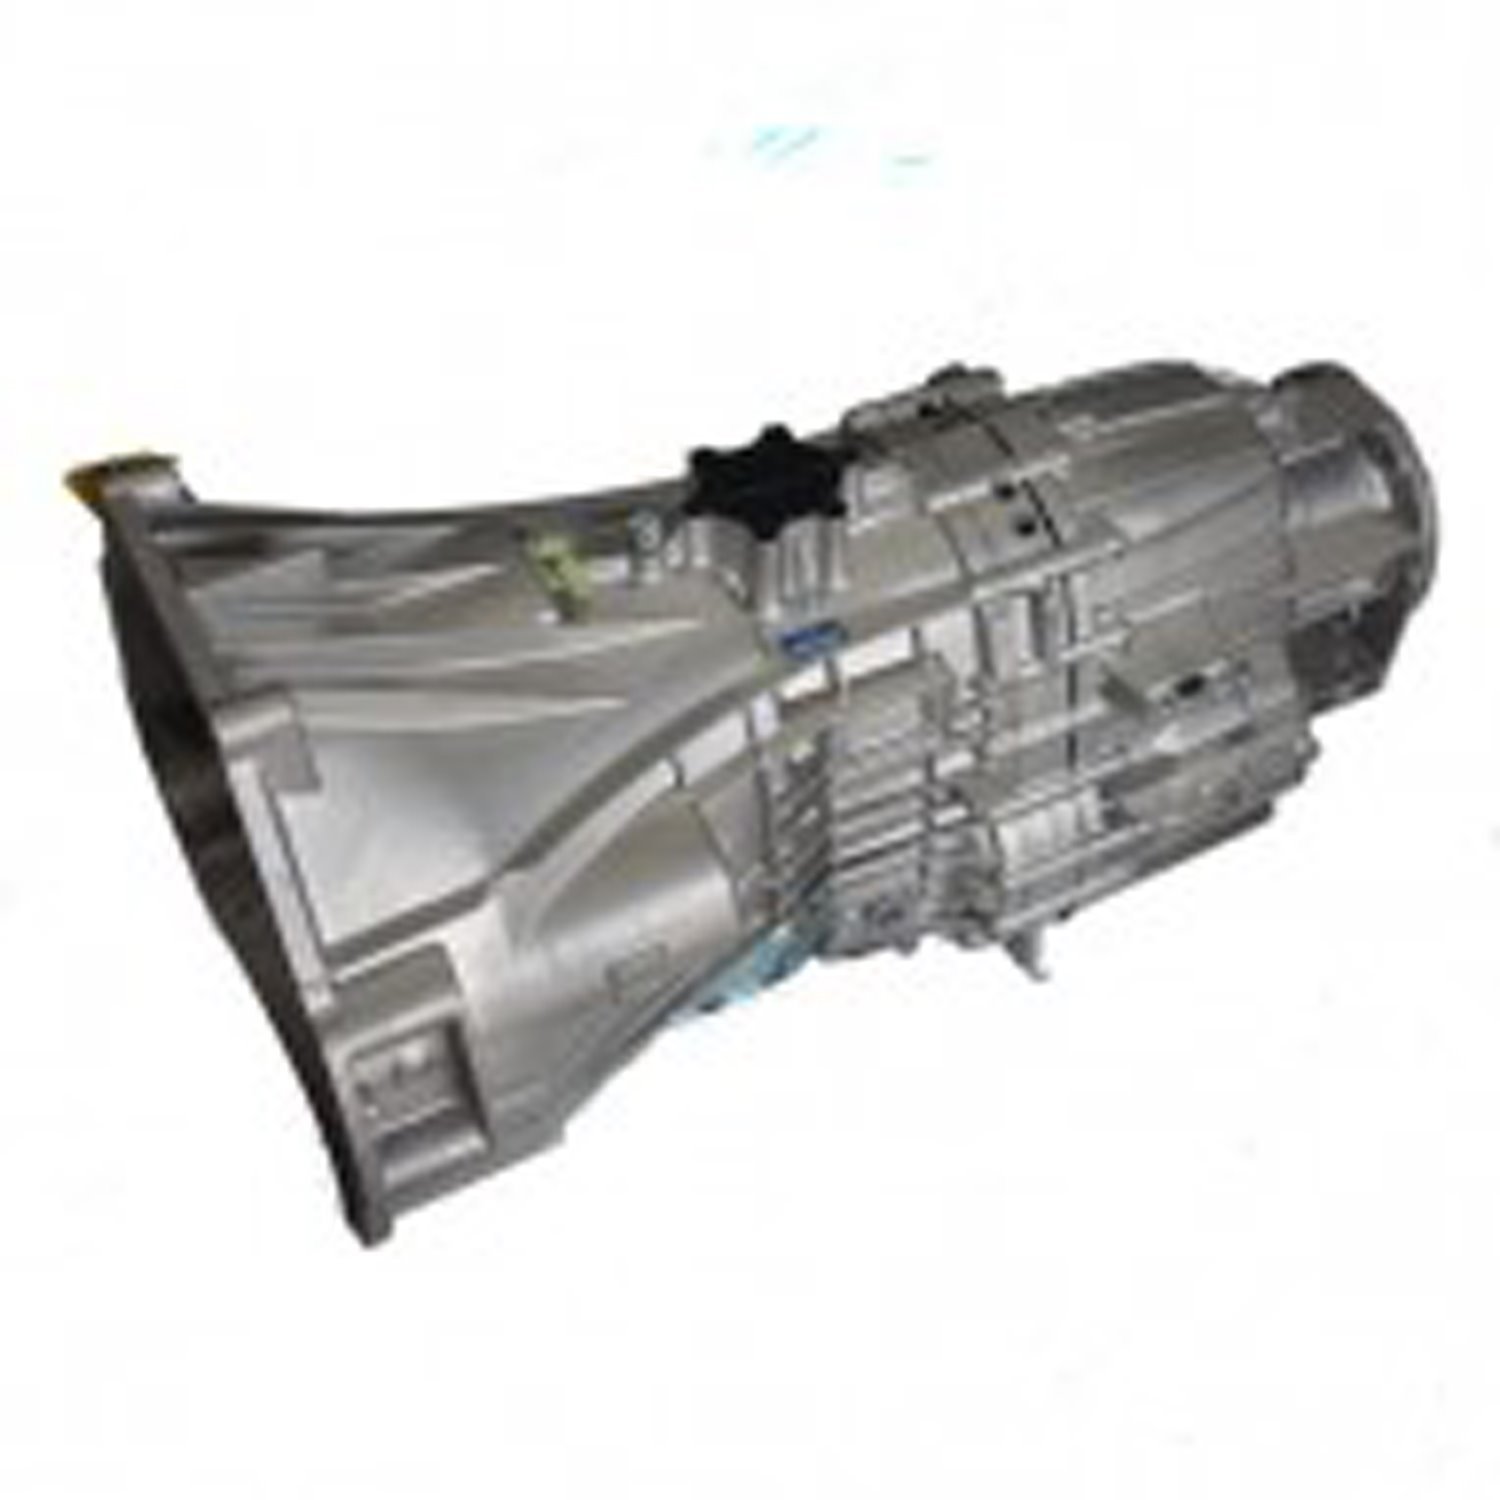 Remanufactured S6-S650F Manual Transmission for Ford 01-03 F-series 7.3L, 4x4, 6 Speed